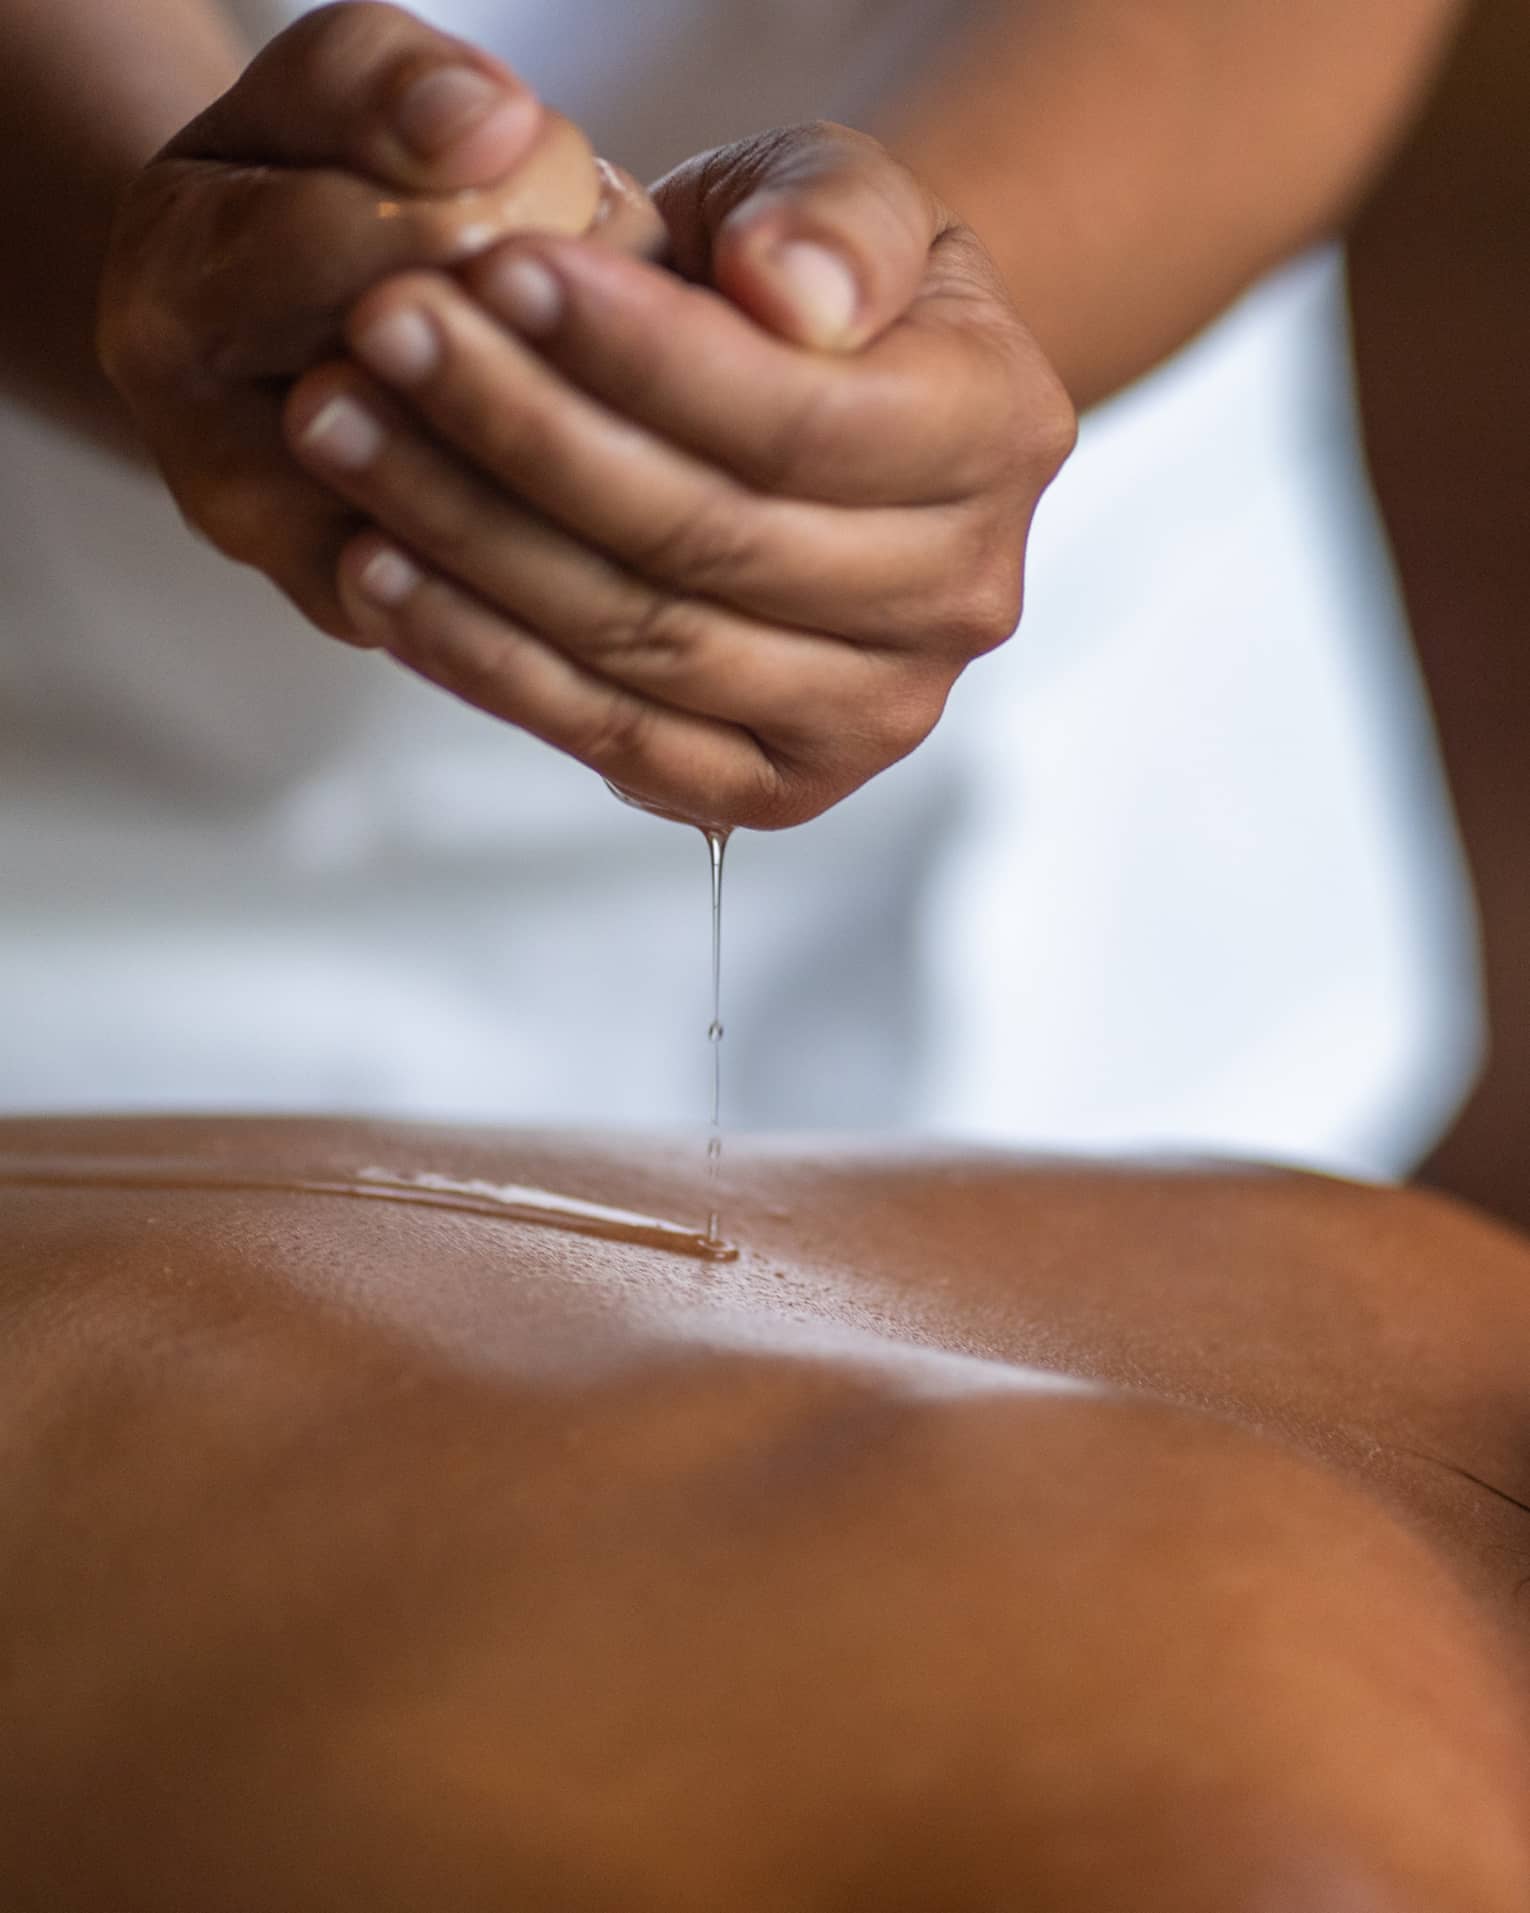 Delicate hands apply oil to a guest's back during a spa treatment